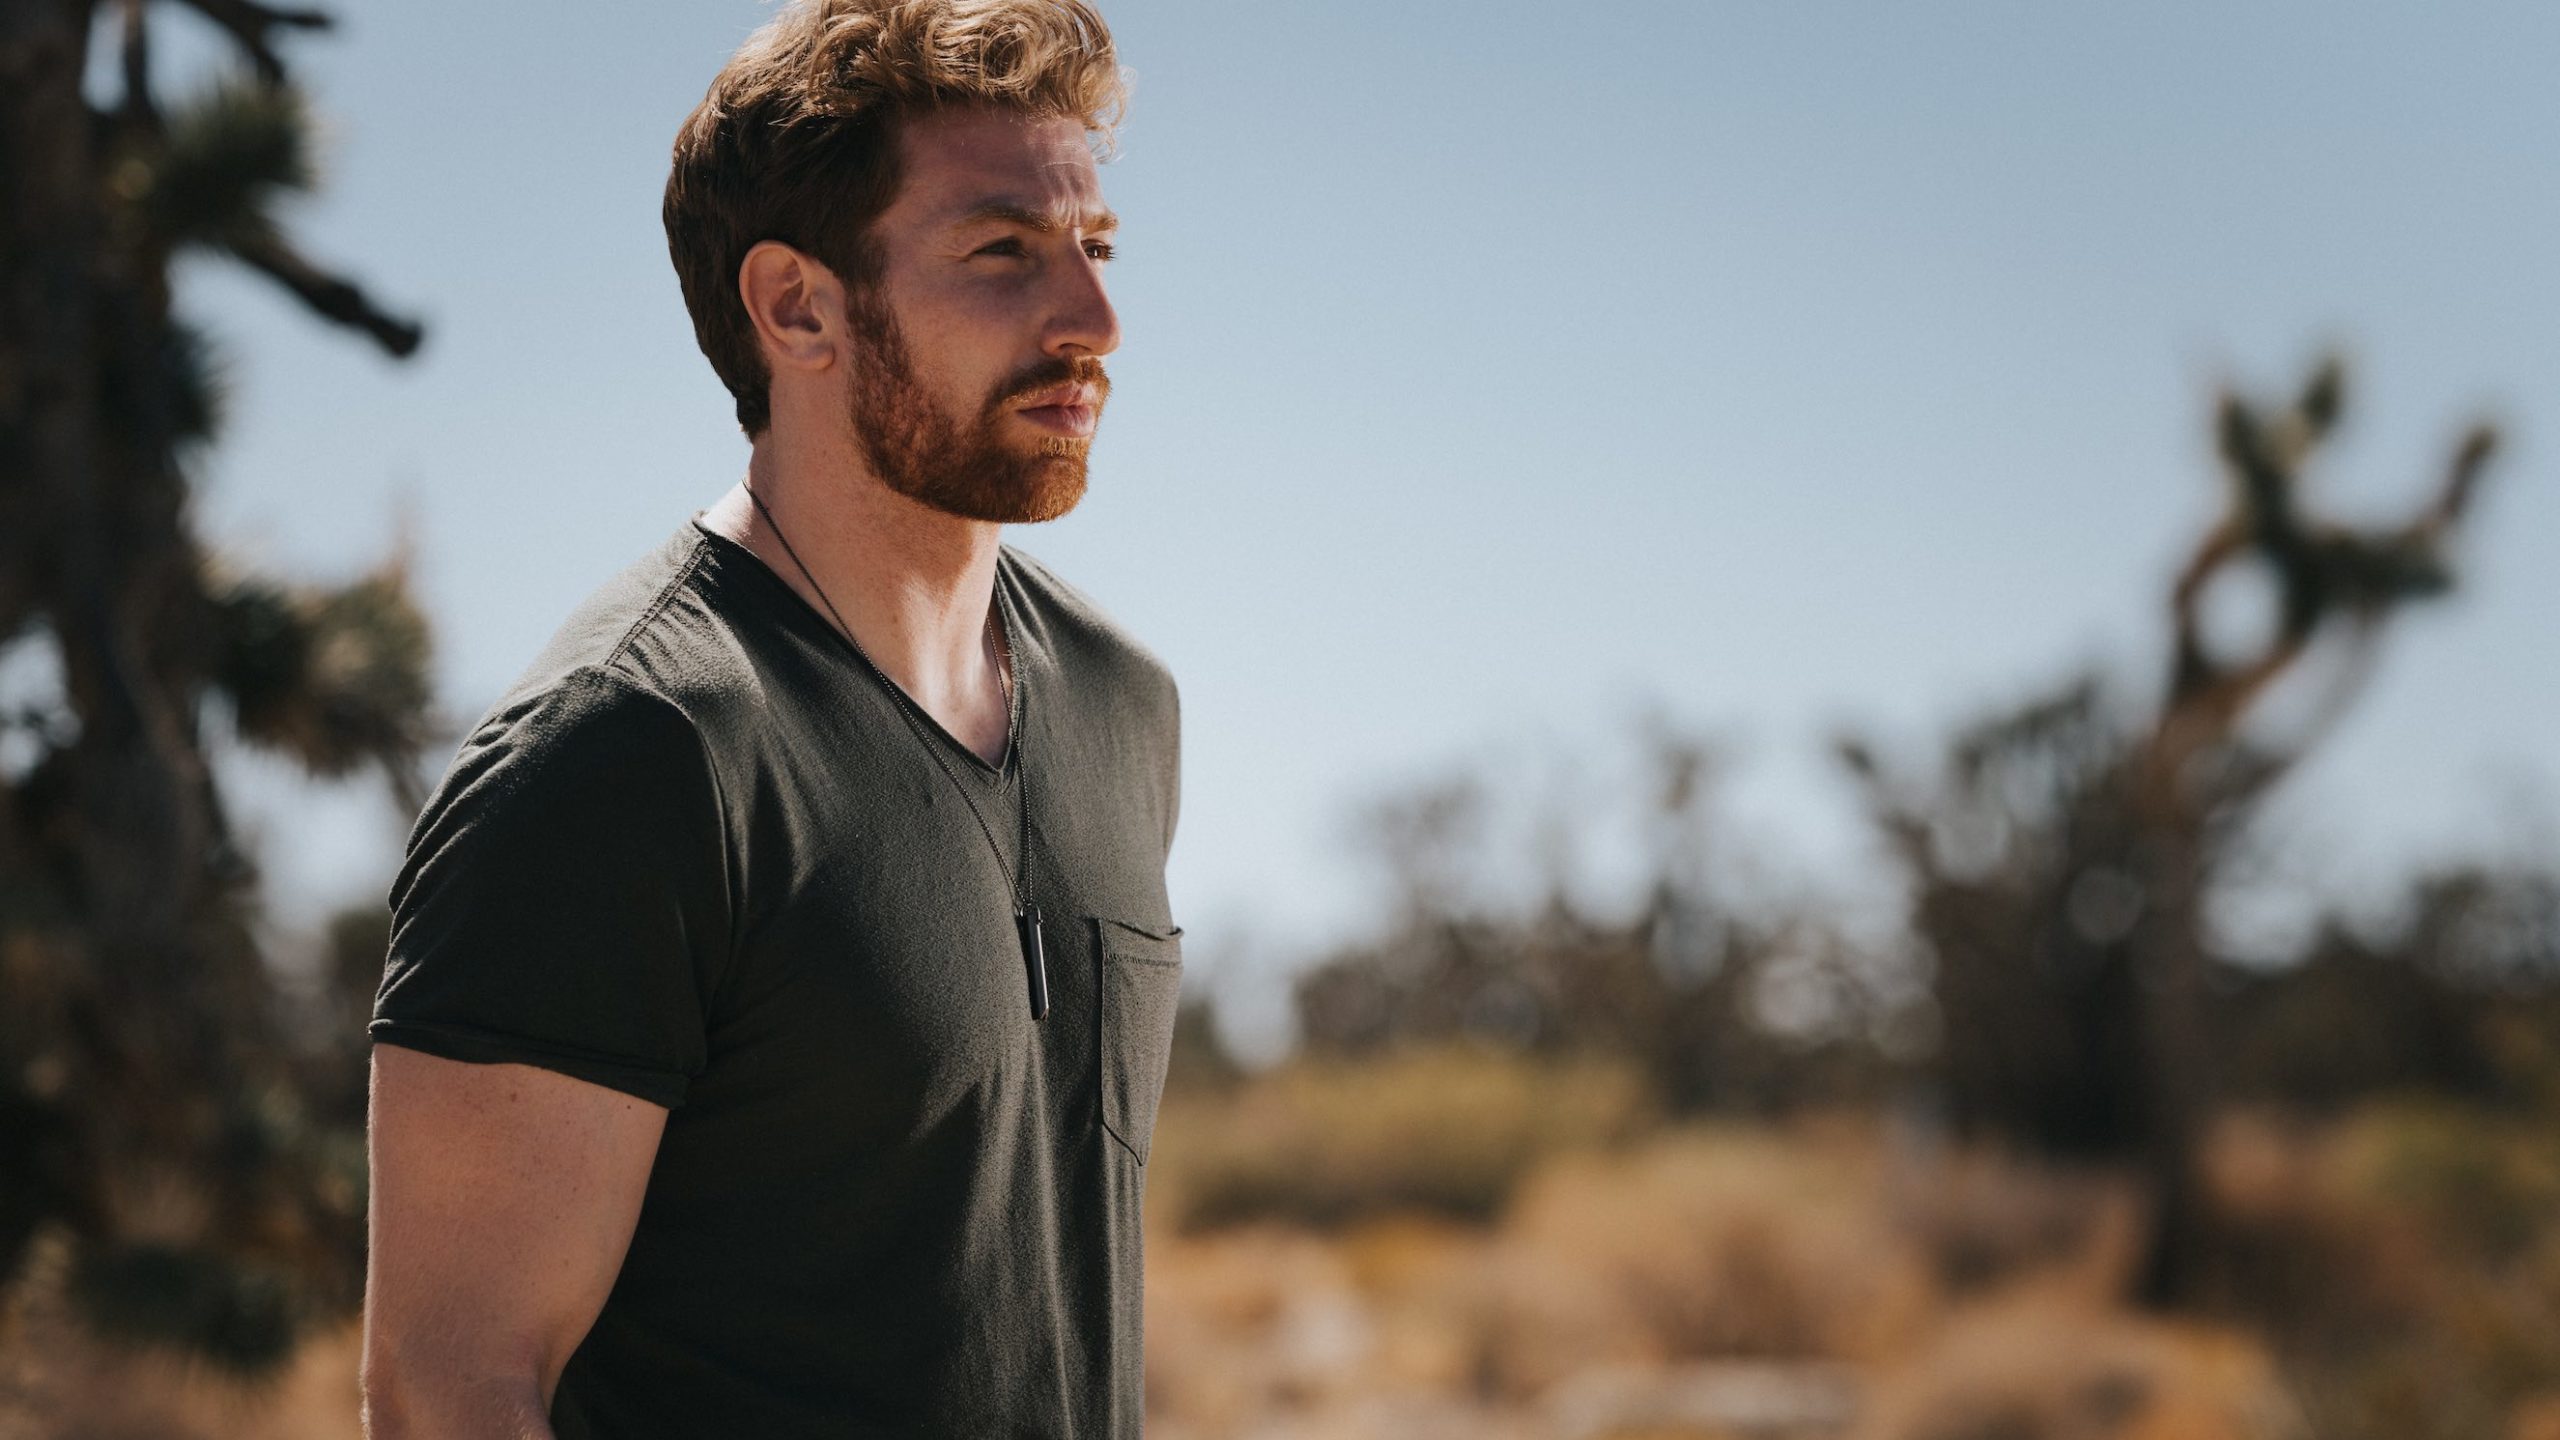 Muscular male with short, red hair and beard wearing a black tshirt looking off into the distance wearing a Komuso whistle around his neck